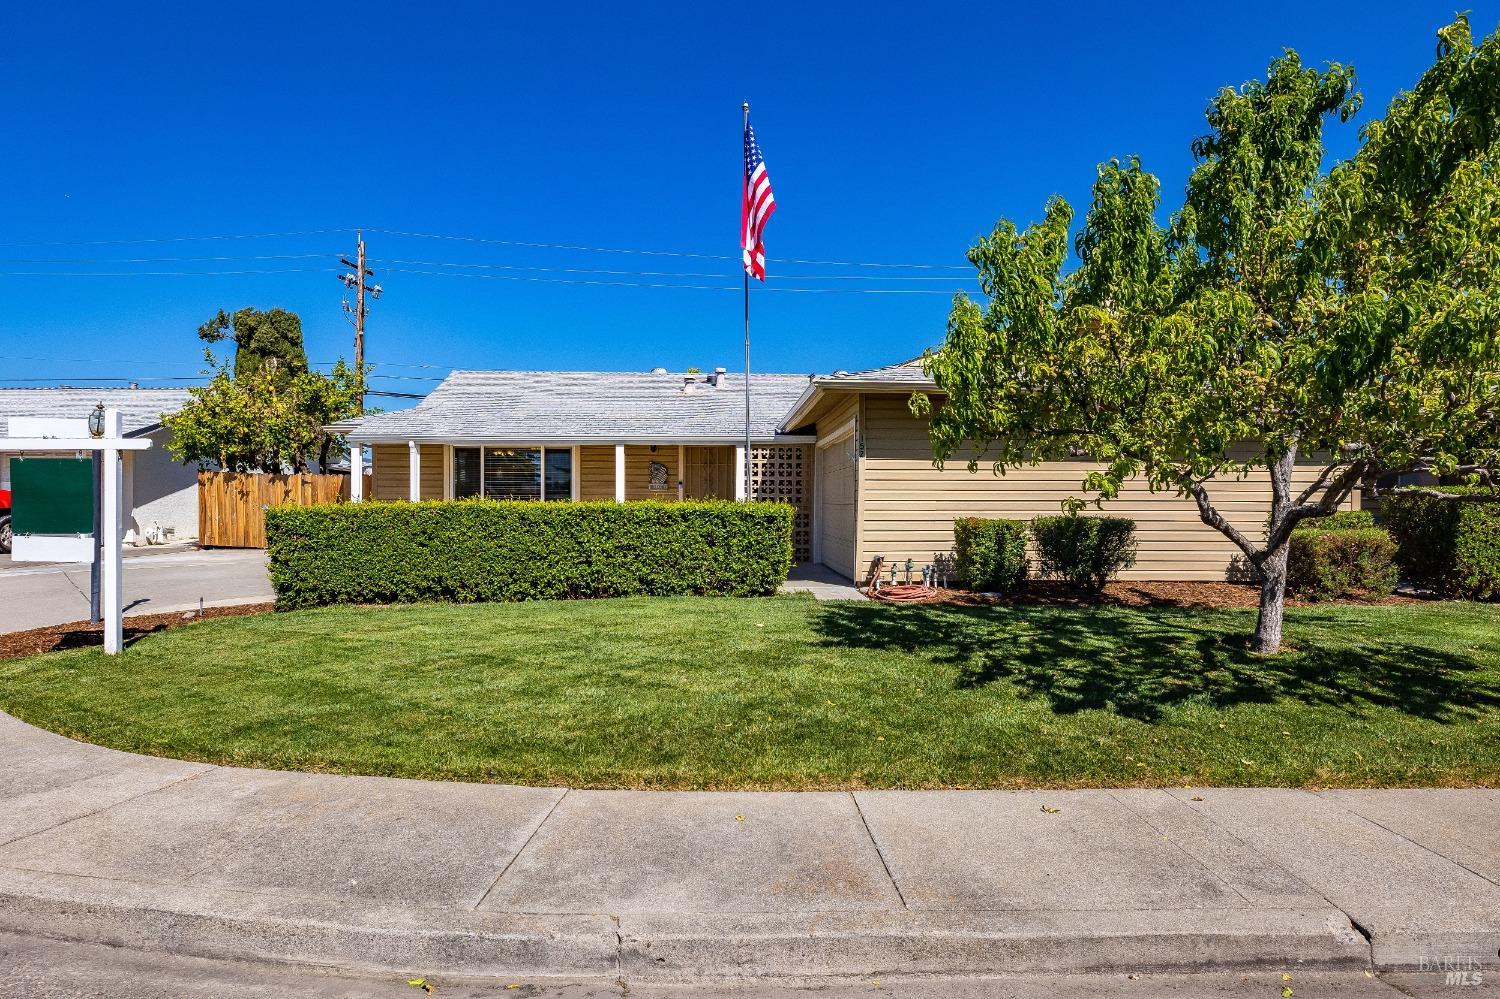 Charming 3 bed/2 bath home in the Leisure Town Vacaville 55+ community. Conveniently situated near a